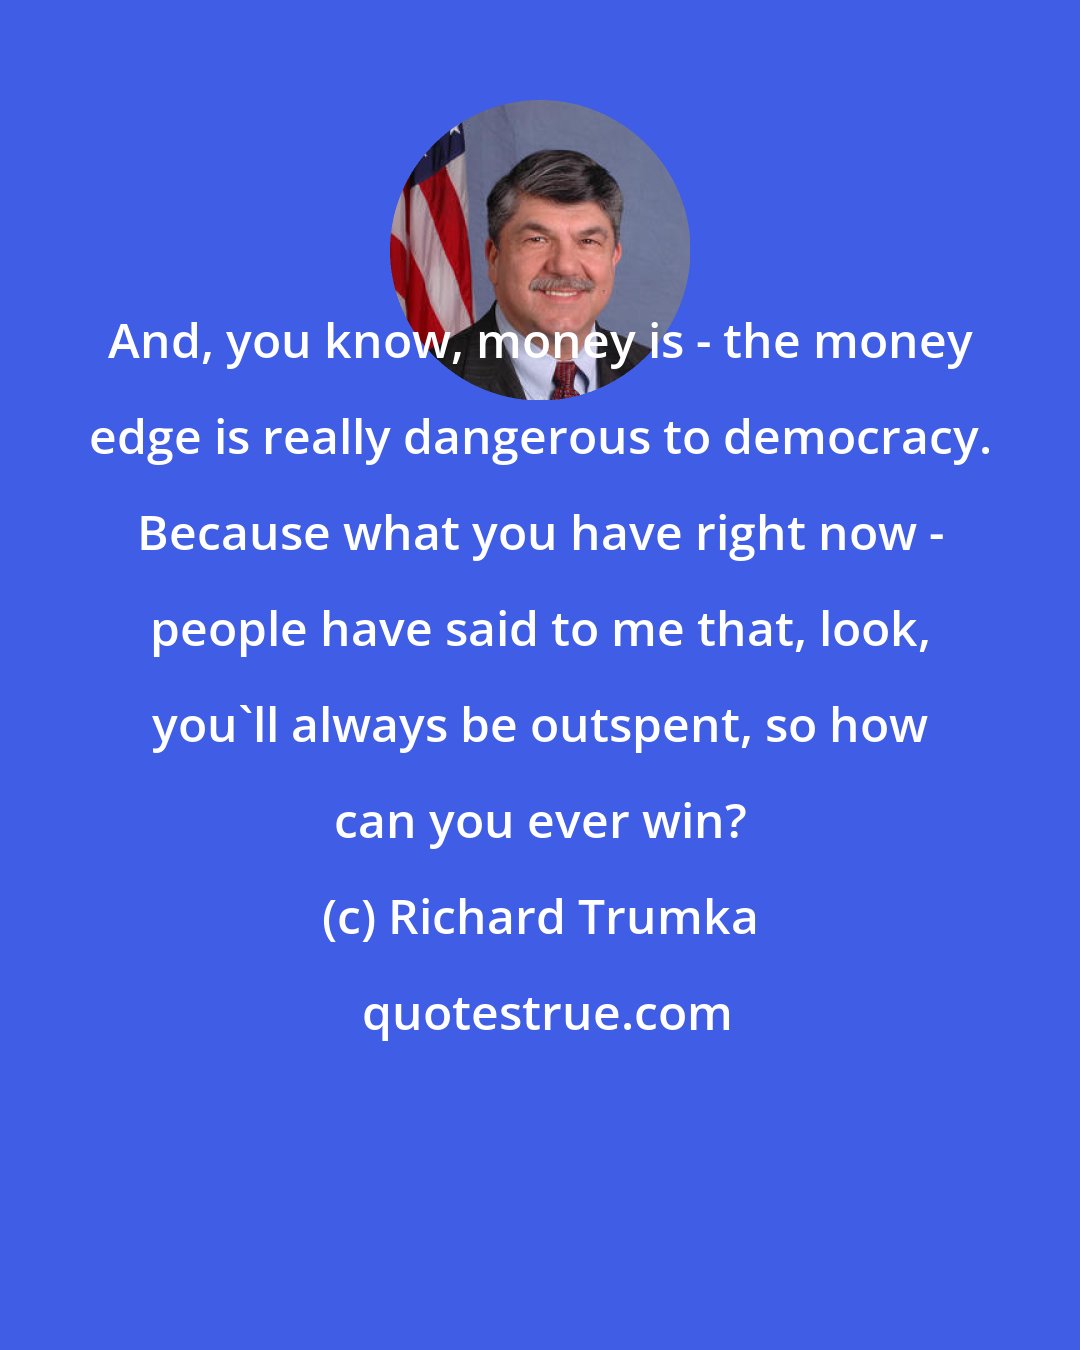 Richard Trumka: And, you know, money is - the money edge is really dangerous to democracy. Because what you have right now - people have said to me that, look, you'll always be outspent, so how can you ever win?